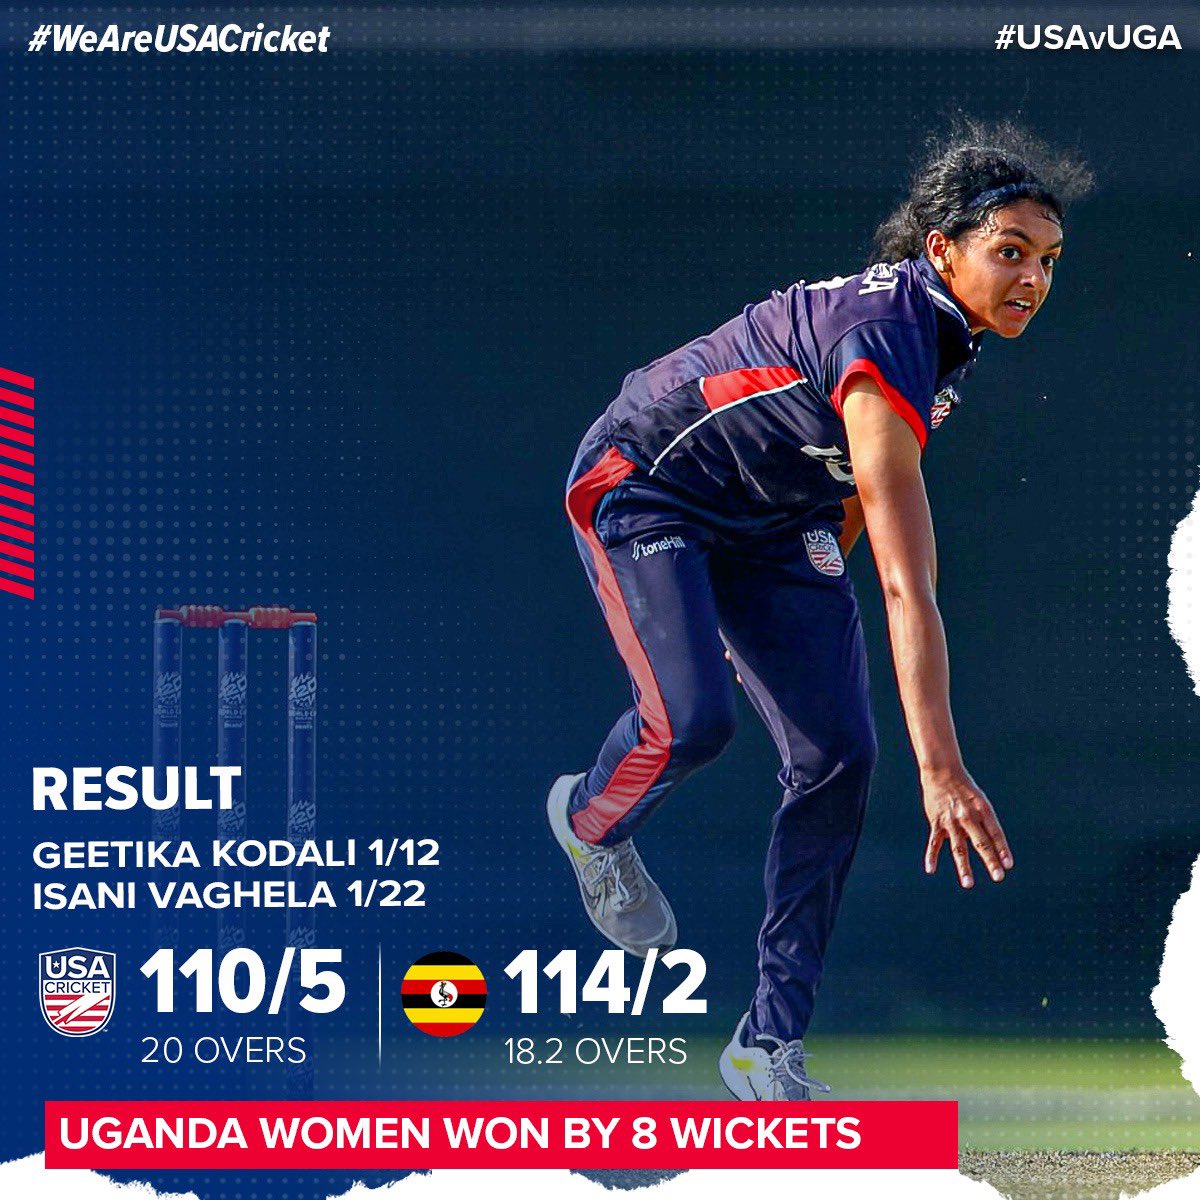 That’s a wrap for our first match of the @ICC #T20WorldCup Women’s Qualifiers! 🙌

A great effort by #TeamUSA as Uganda win by 8 wickets. 

Catch 🇺🇸’s next match on April 29th against Scotland on Icc.tv!

#WeAreUSACricket